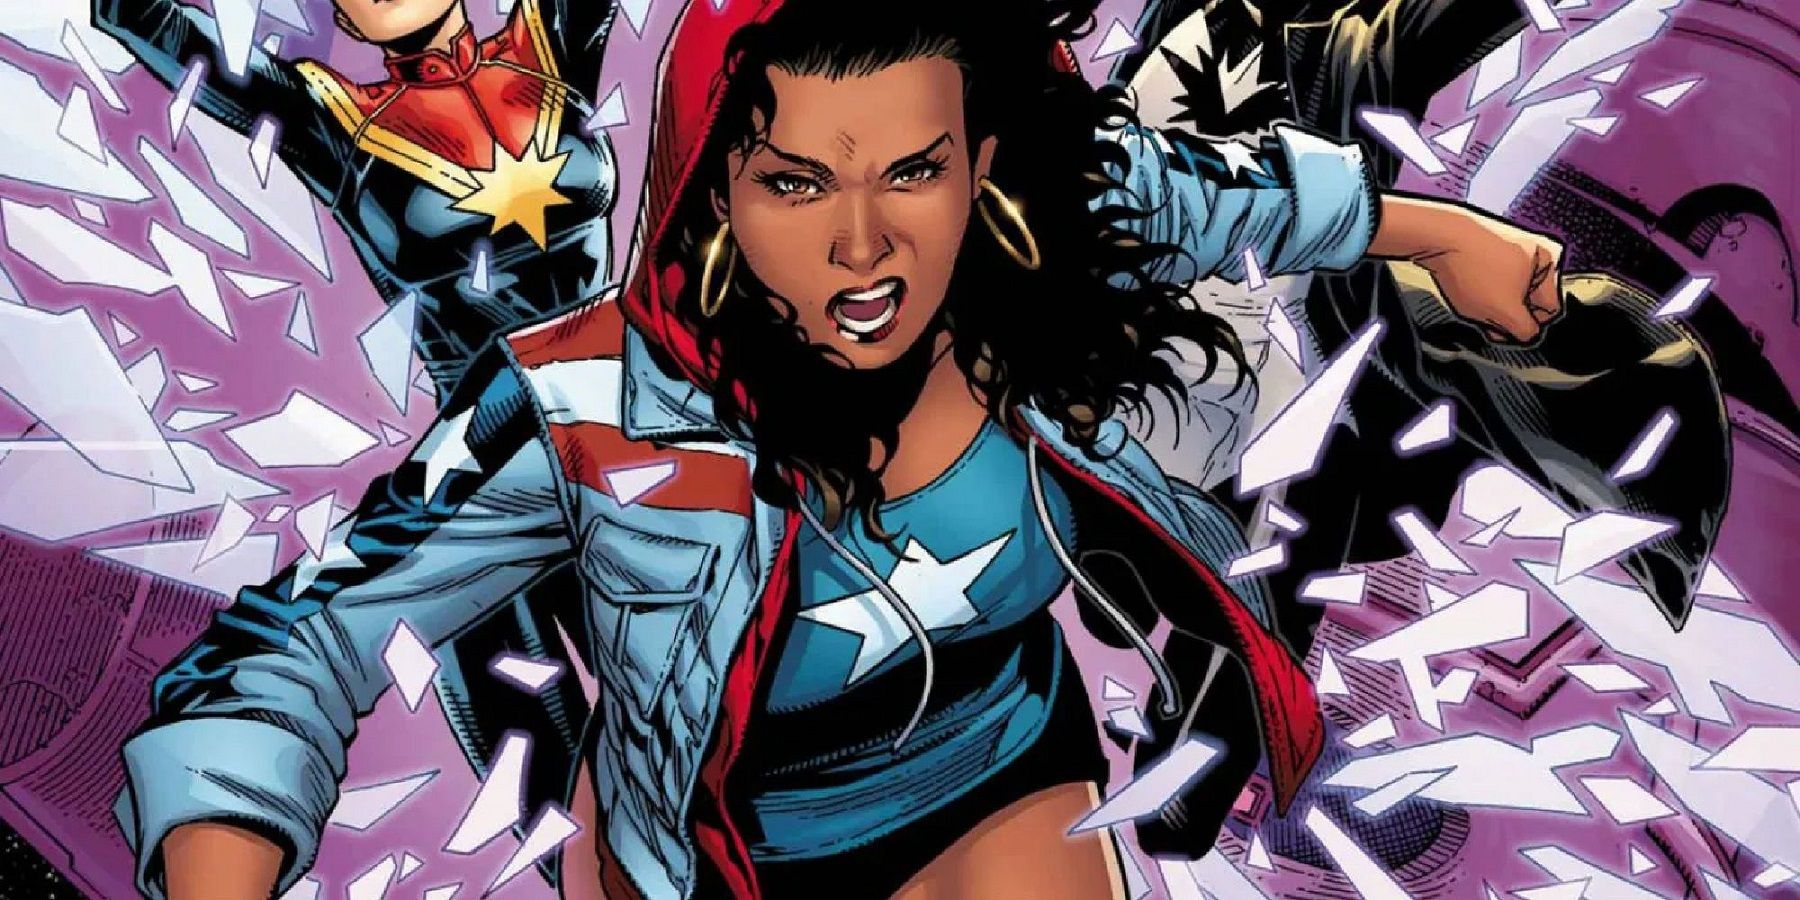 Marvel is teasing a new game with a potentially massive roster, including America Chavez.